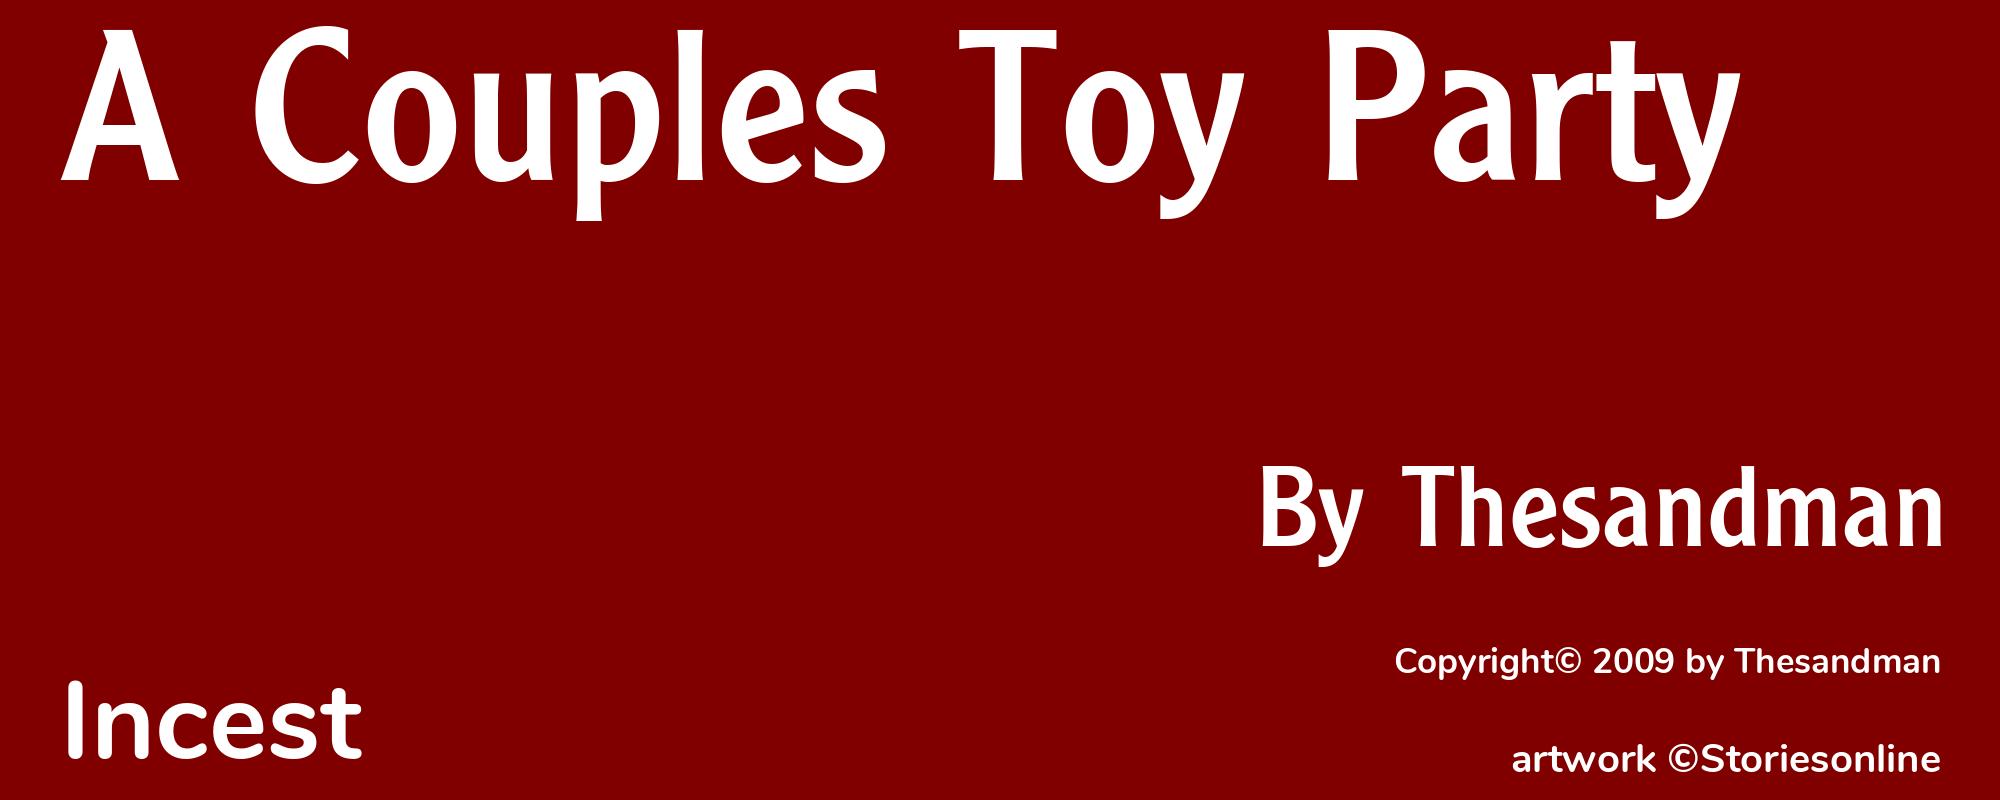 A Couples Toy Party - Cover